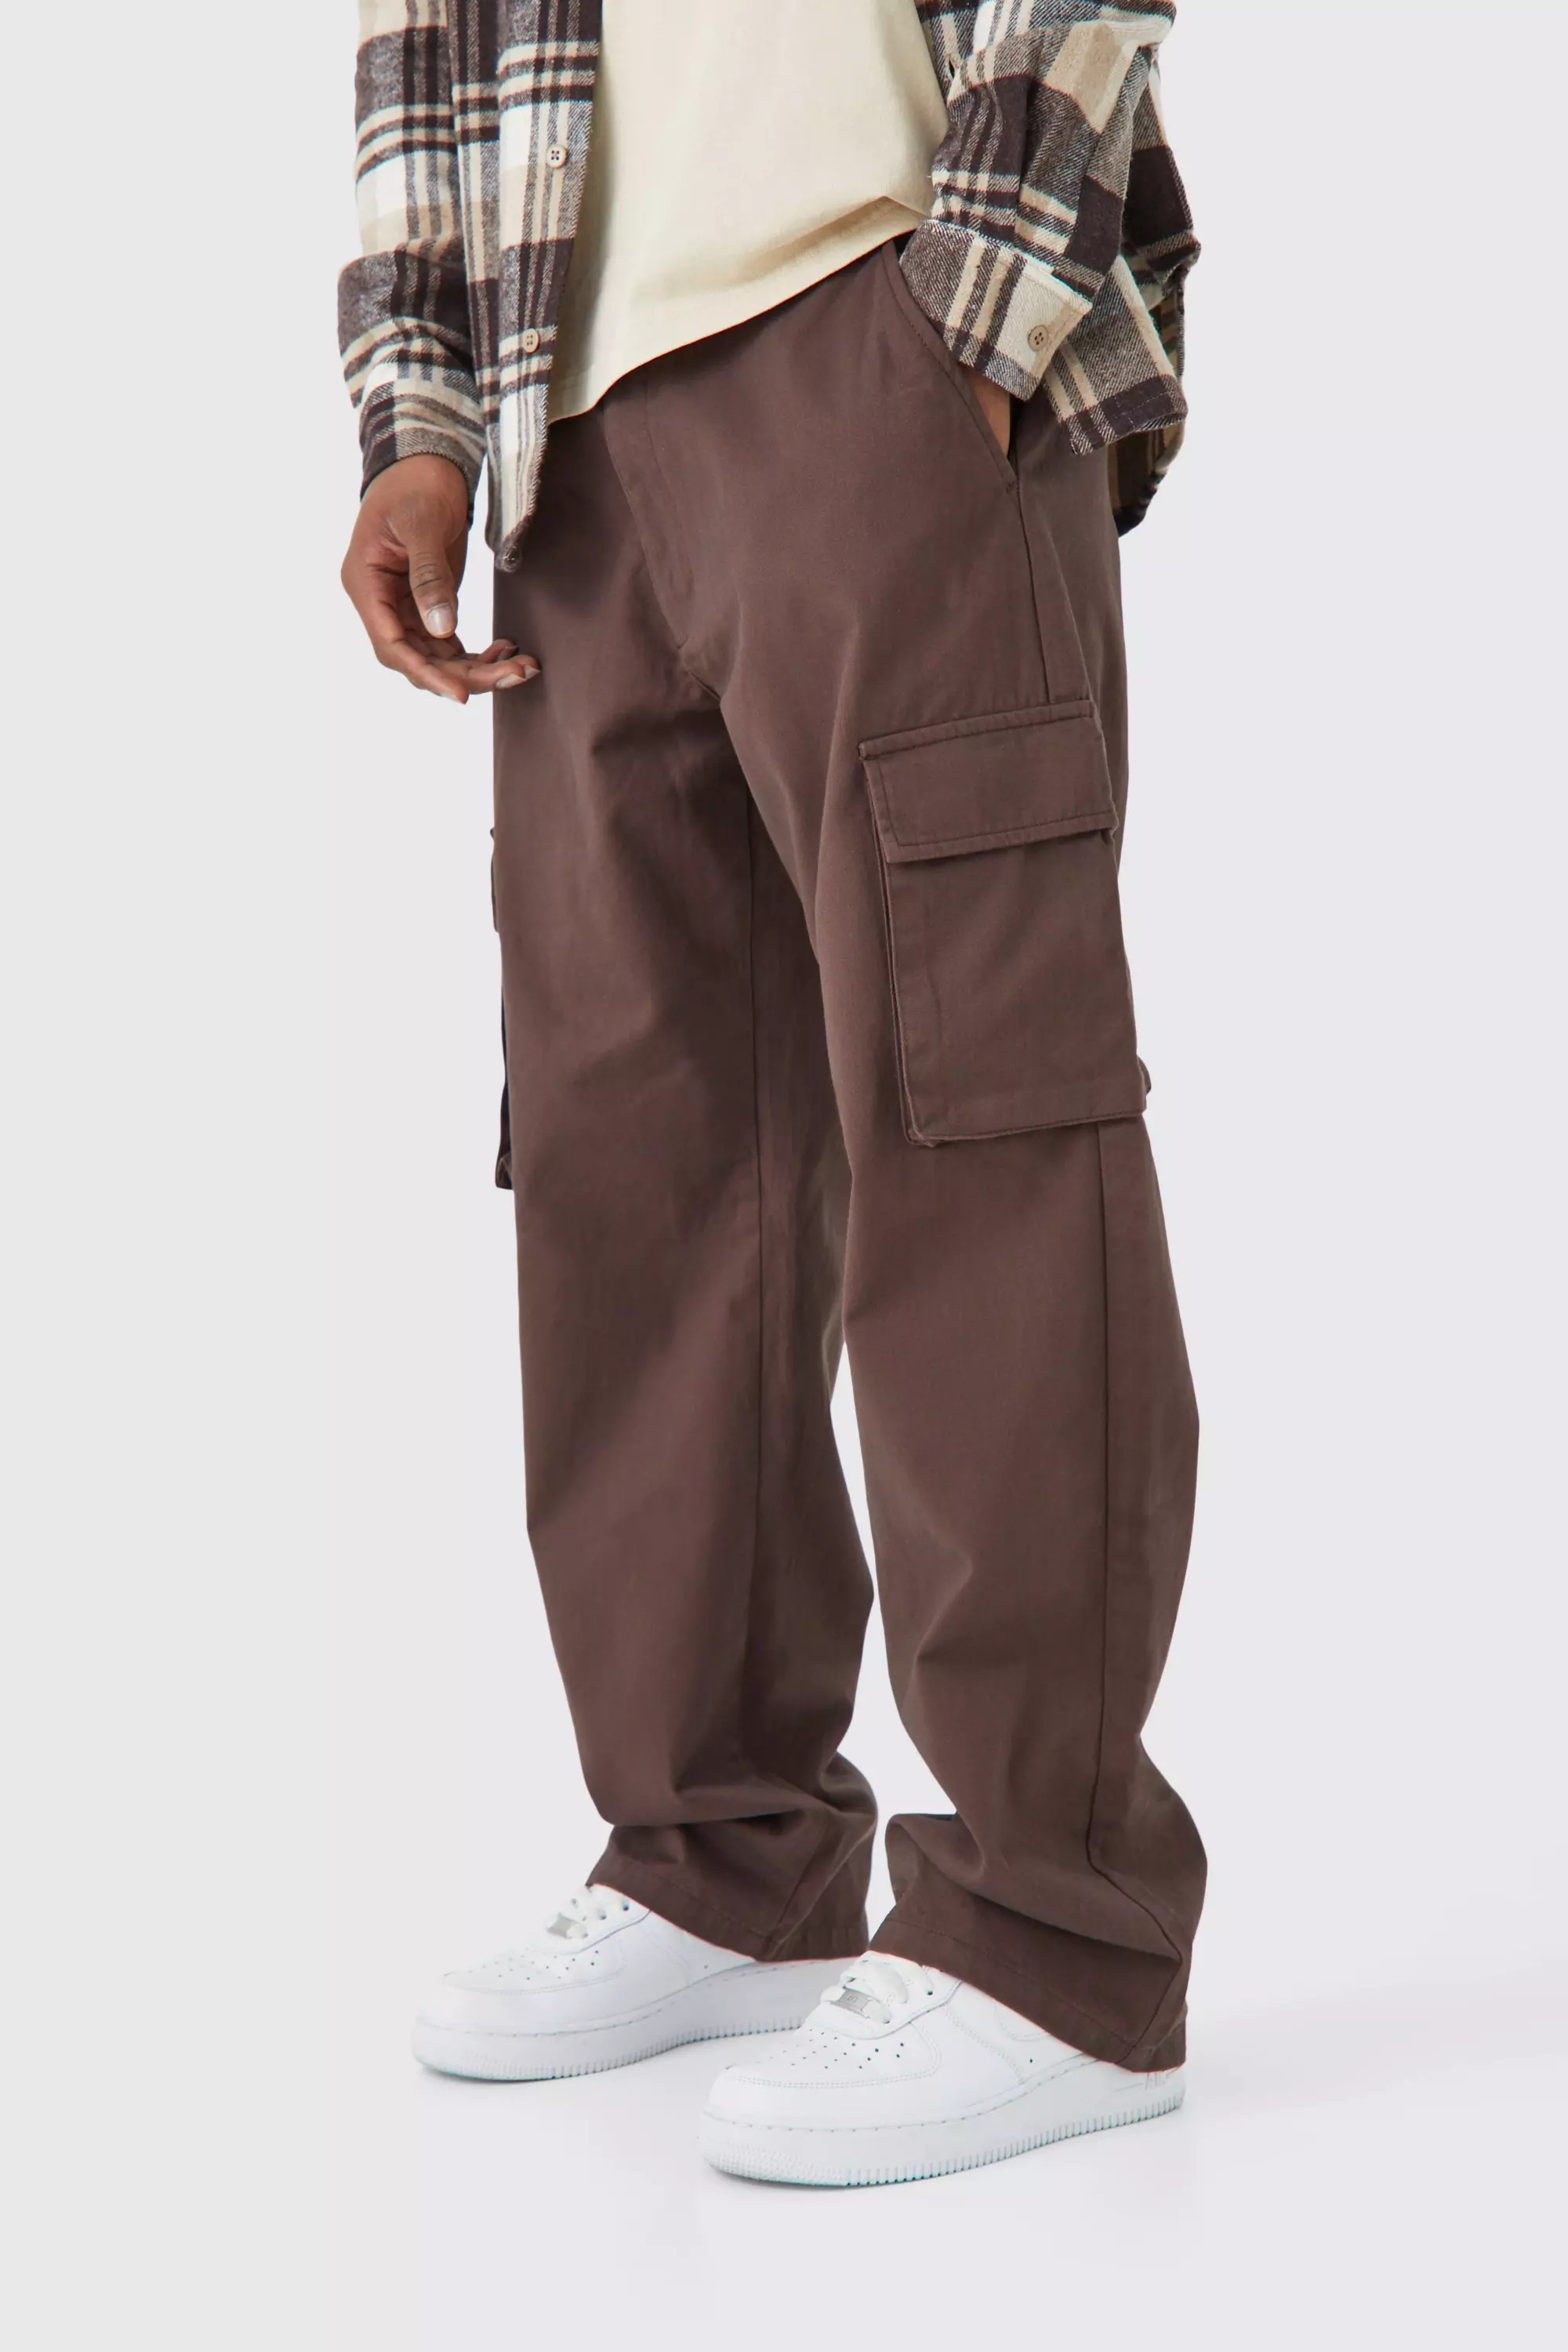 Chocolate Brown Fixed Waist Relaxed Fit Cargo Pants